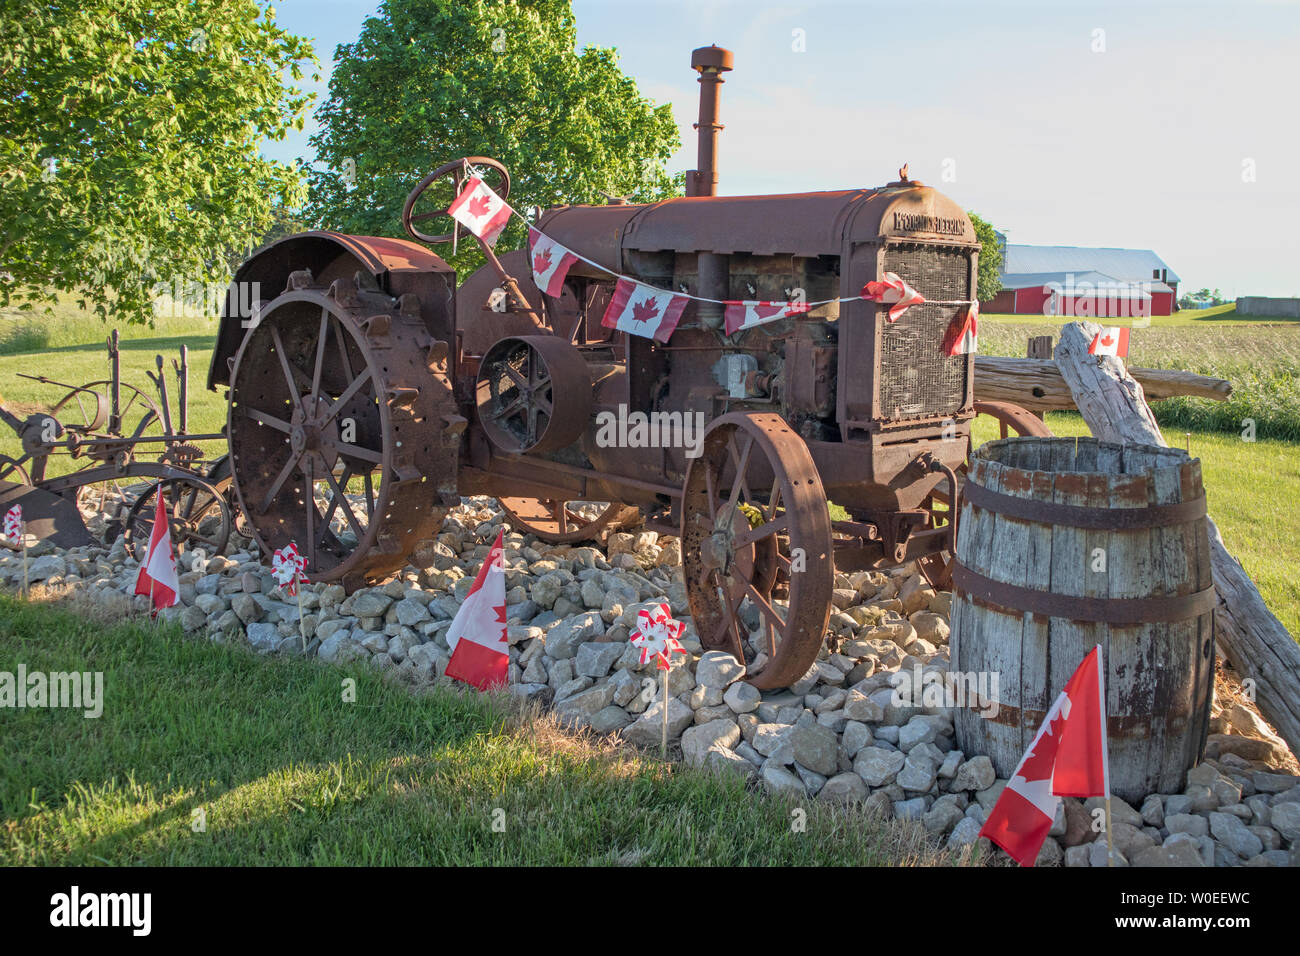 In the countryside, a antique Mc Cormick-Deering tractor bordered with the Canadian flags. The Canada Day. Stock Photo